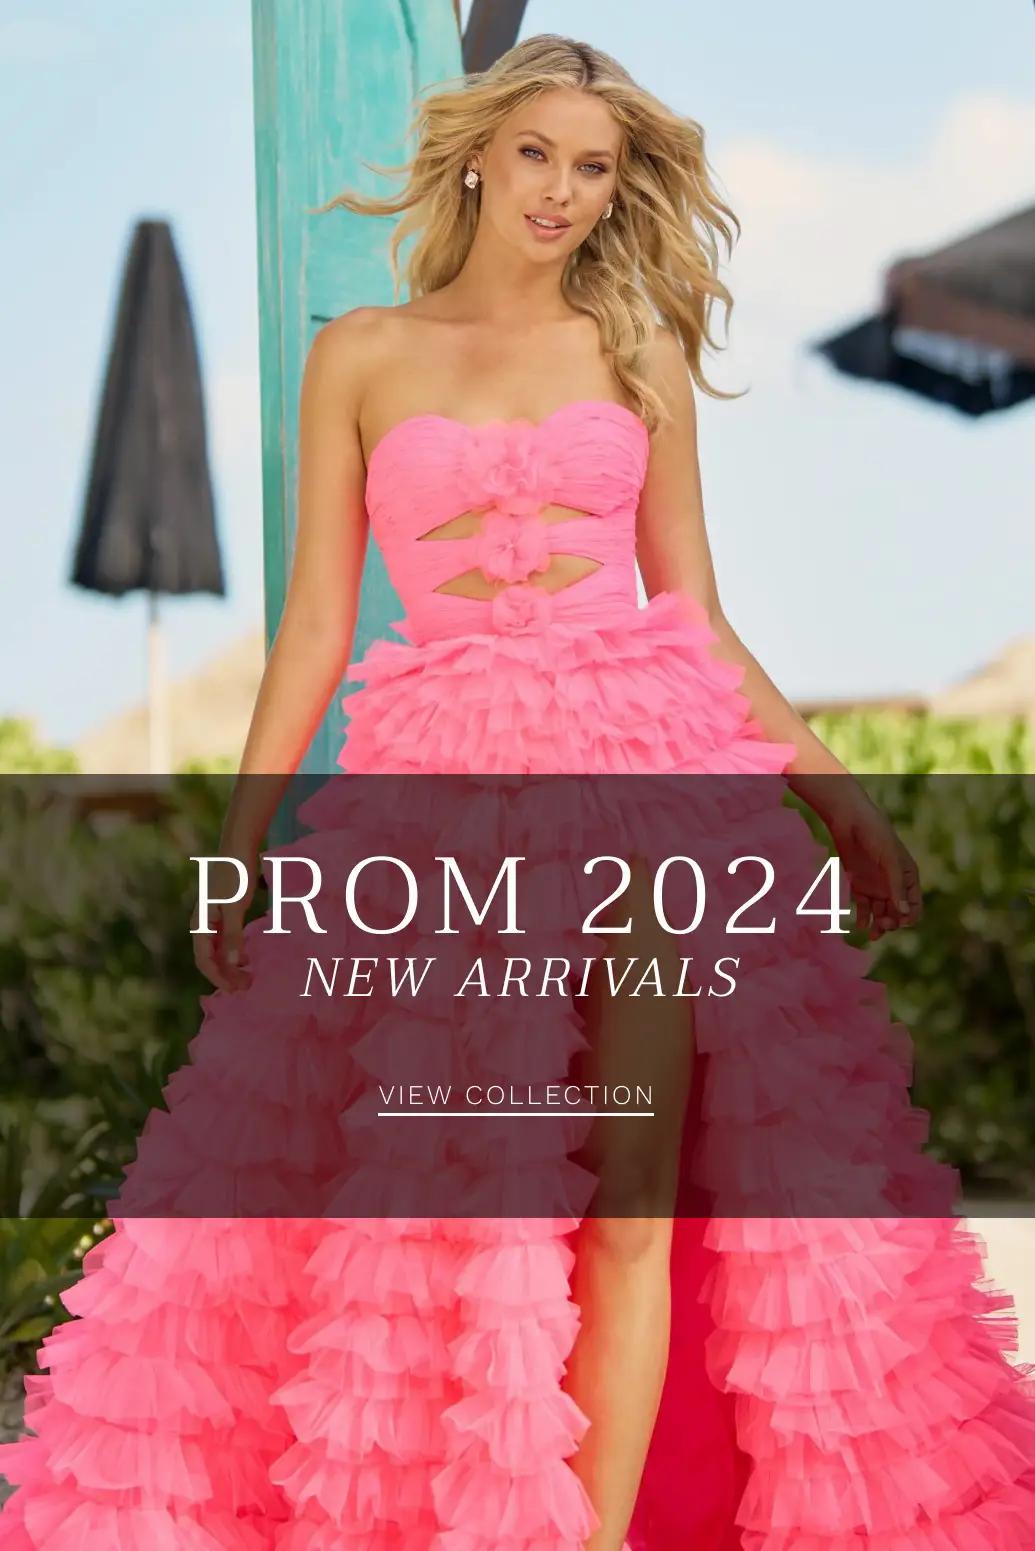 prom banner mobile